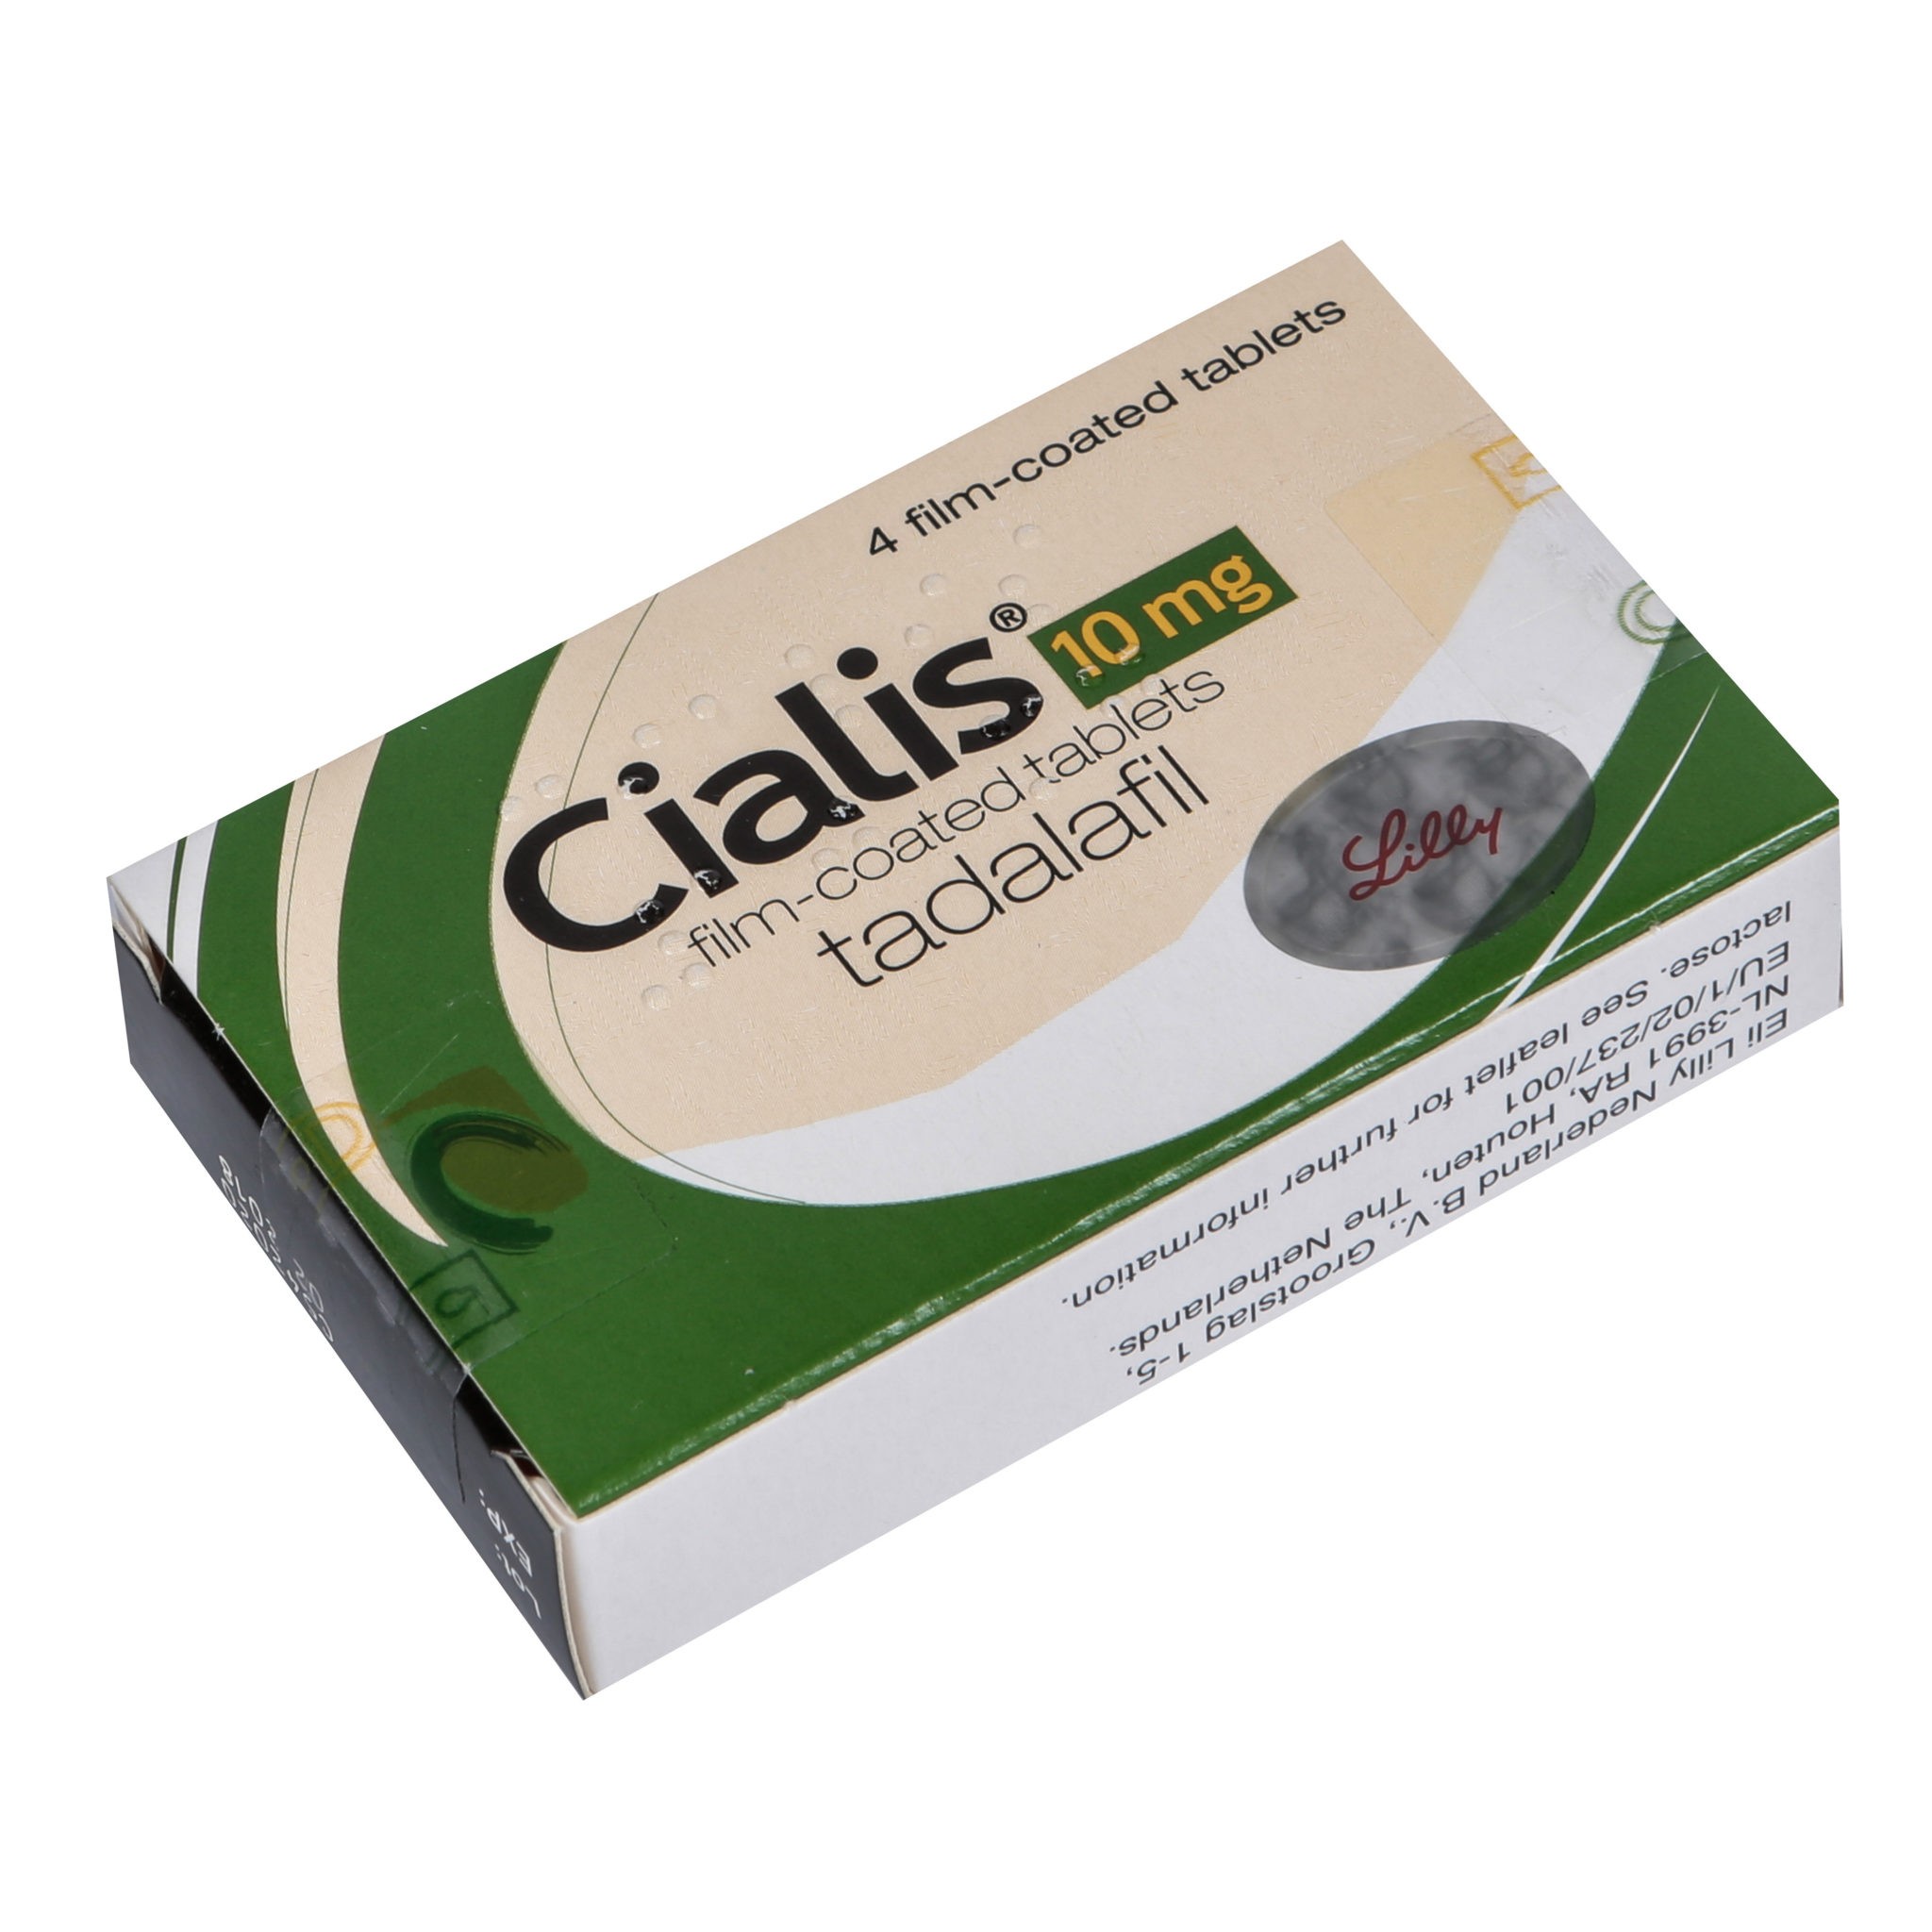 Cialis 10mg Tablets (4 Tablets)